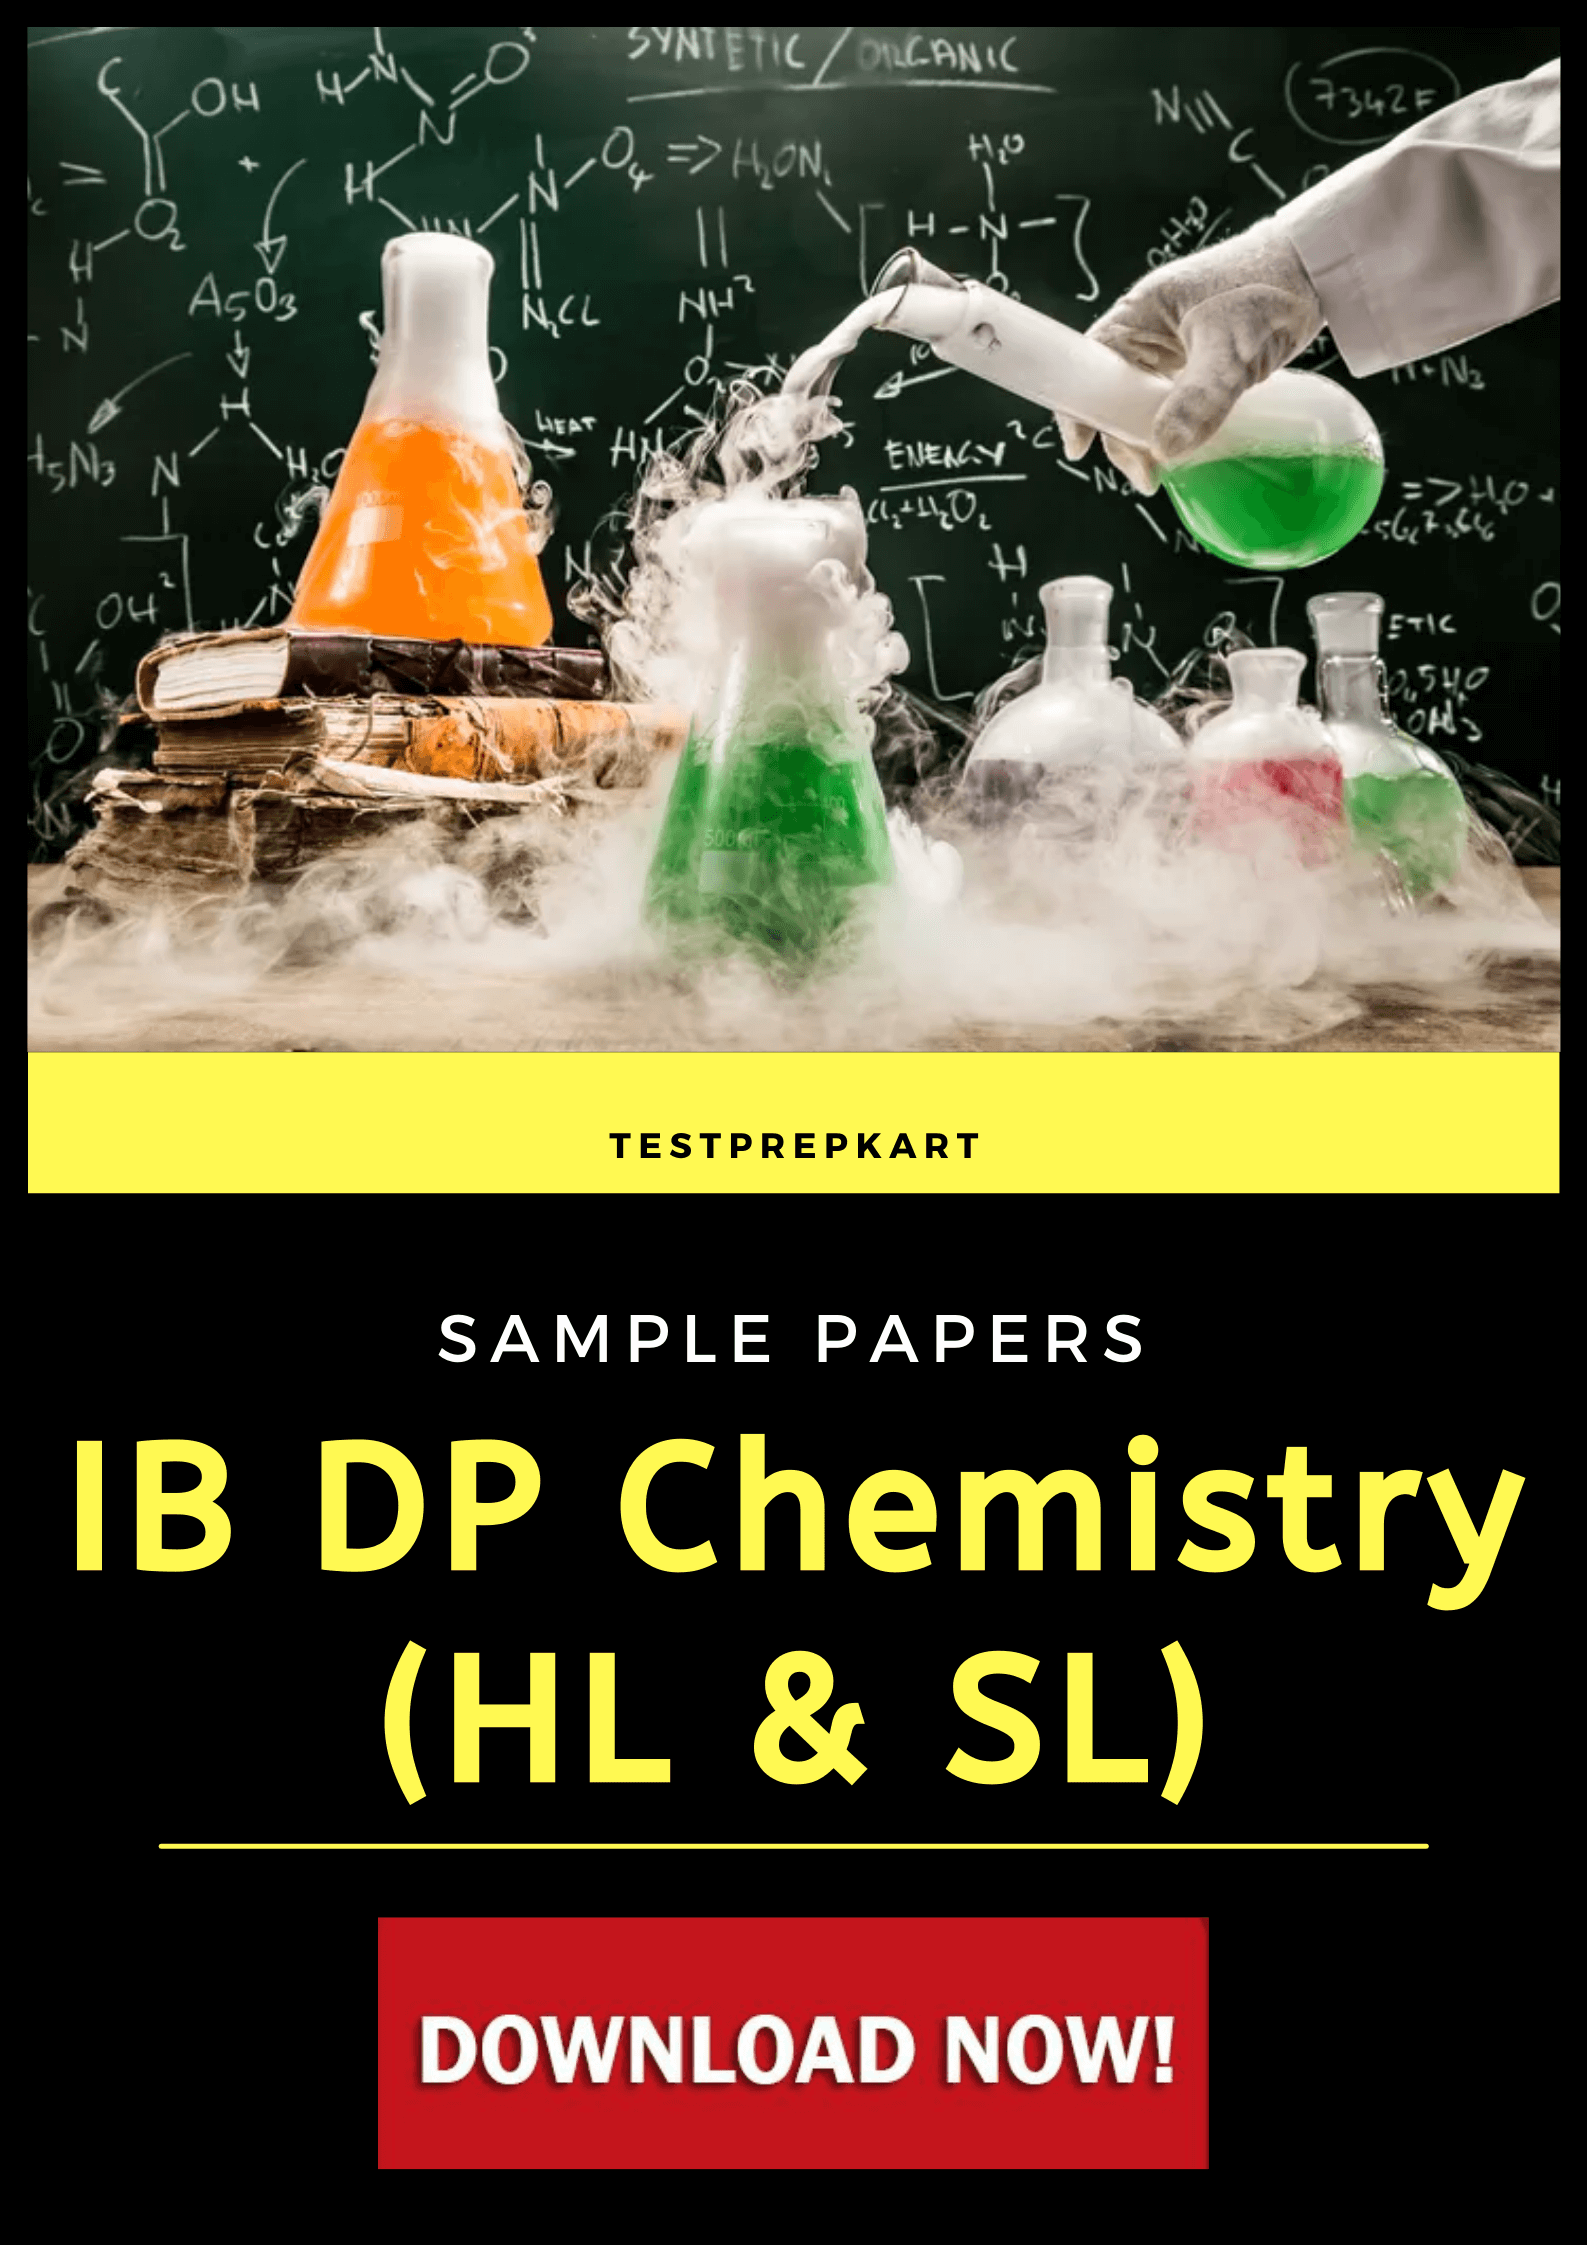  Download IB Chemistry Sample Papers